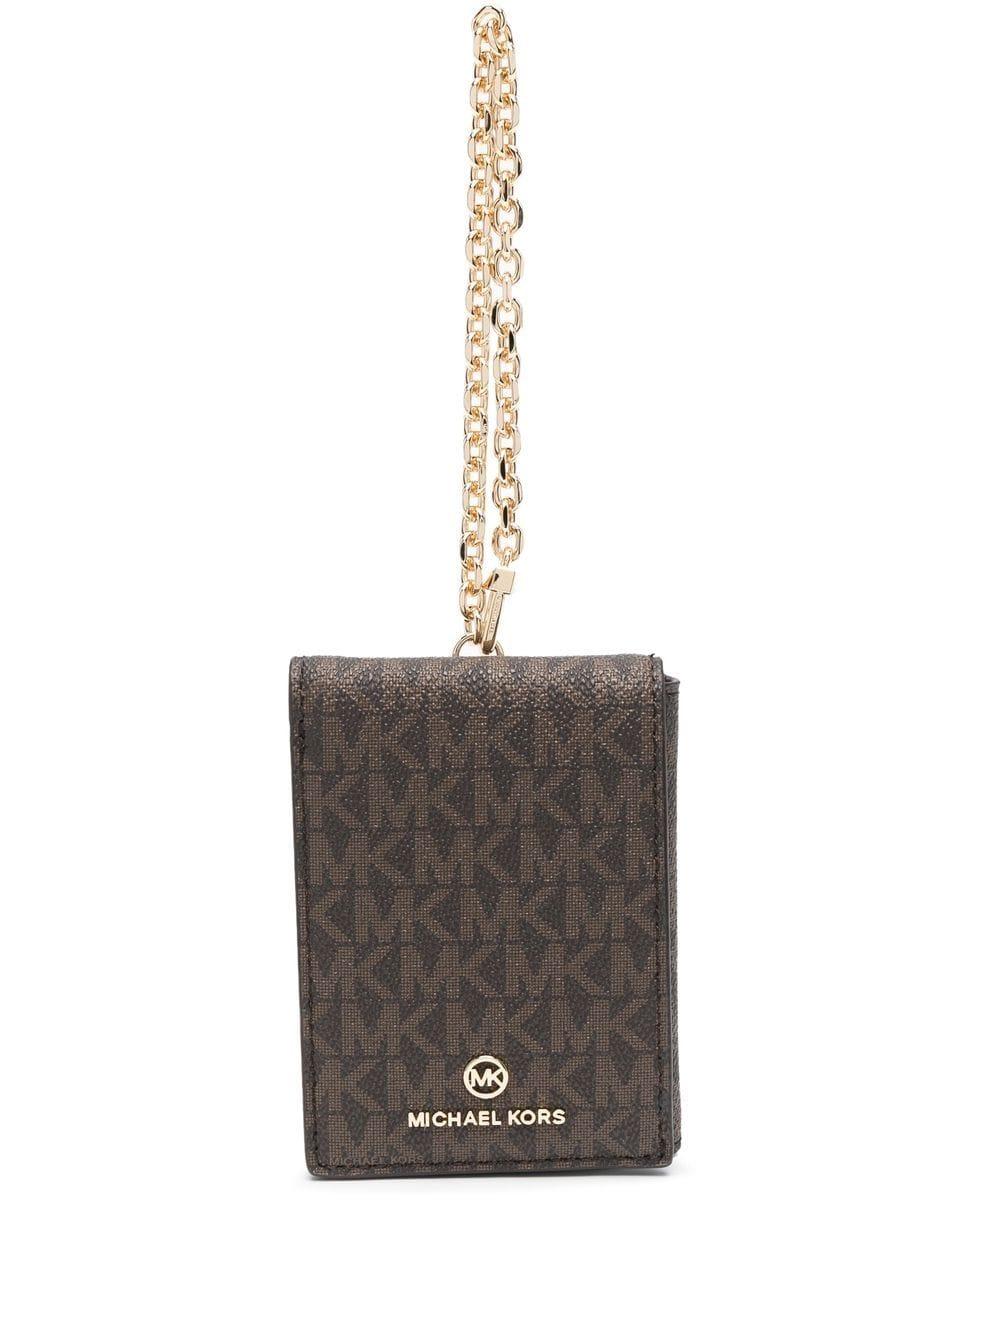 Michael Kors Jet Set Small Woven Leather Card Case